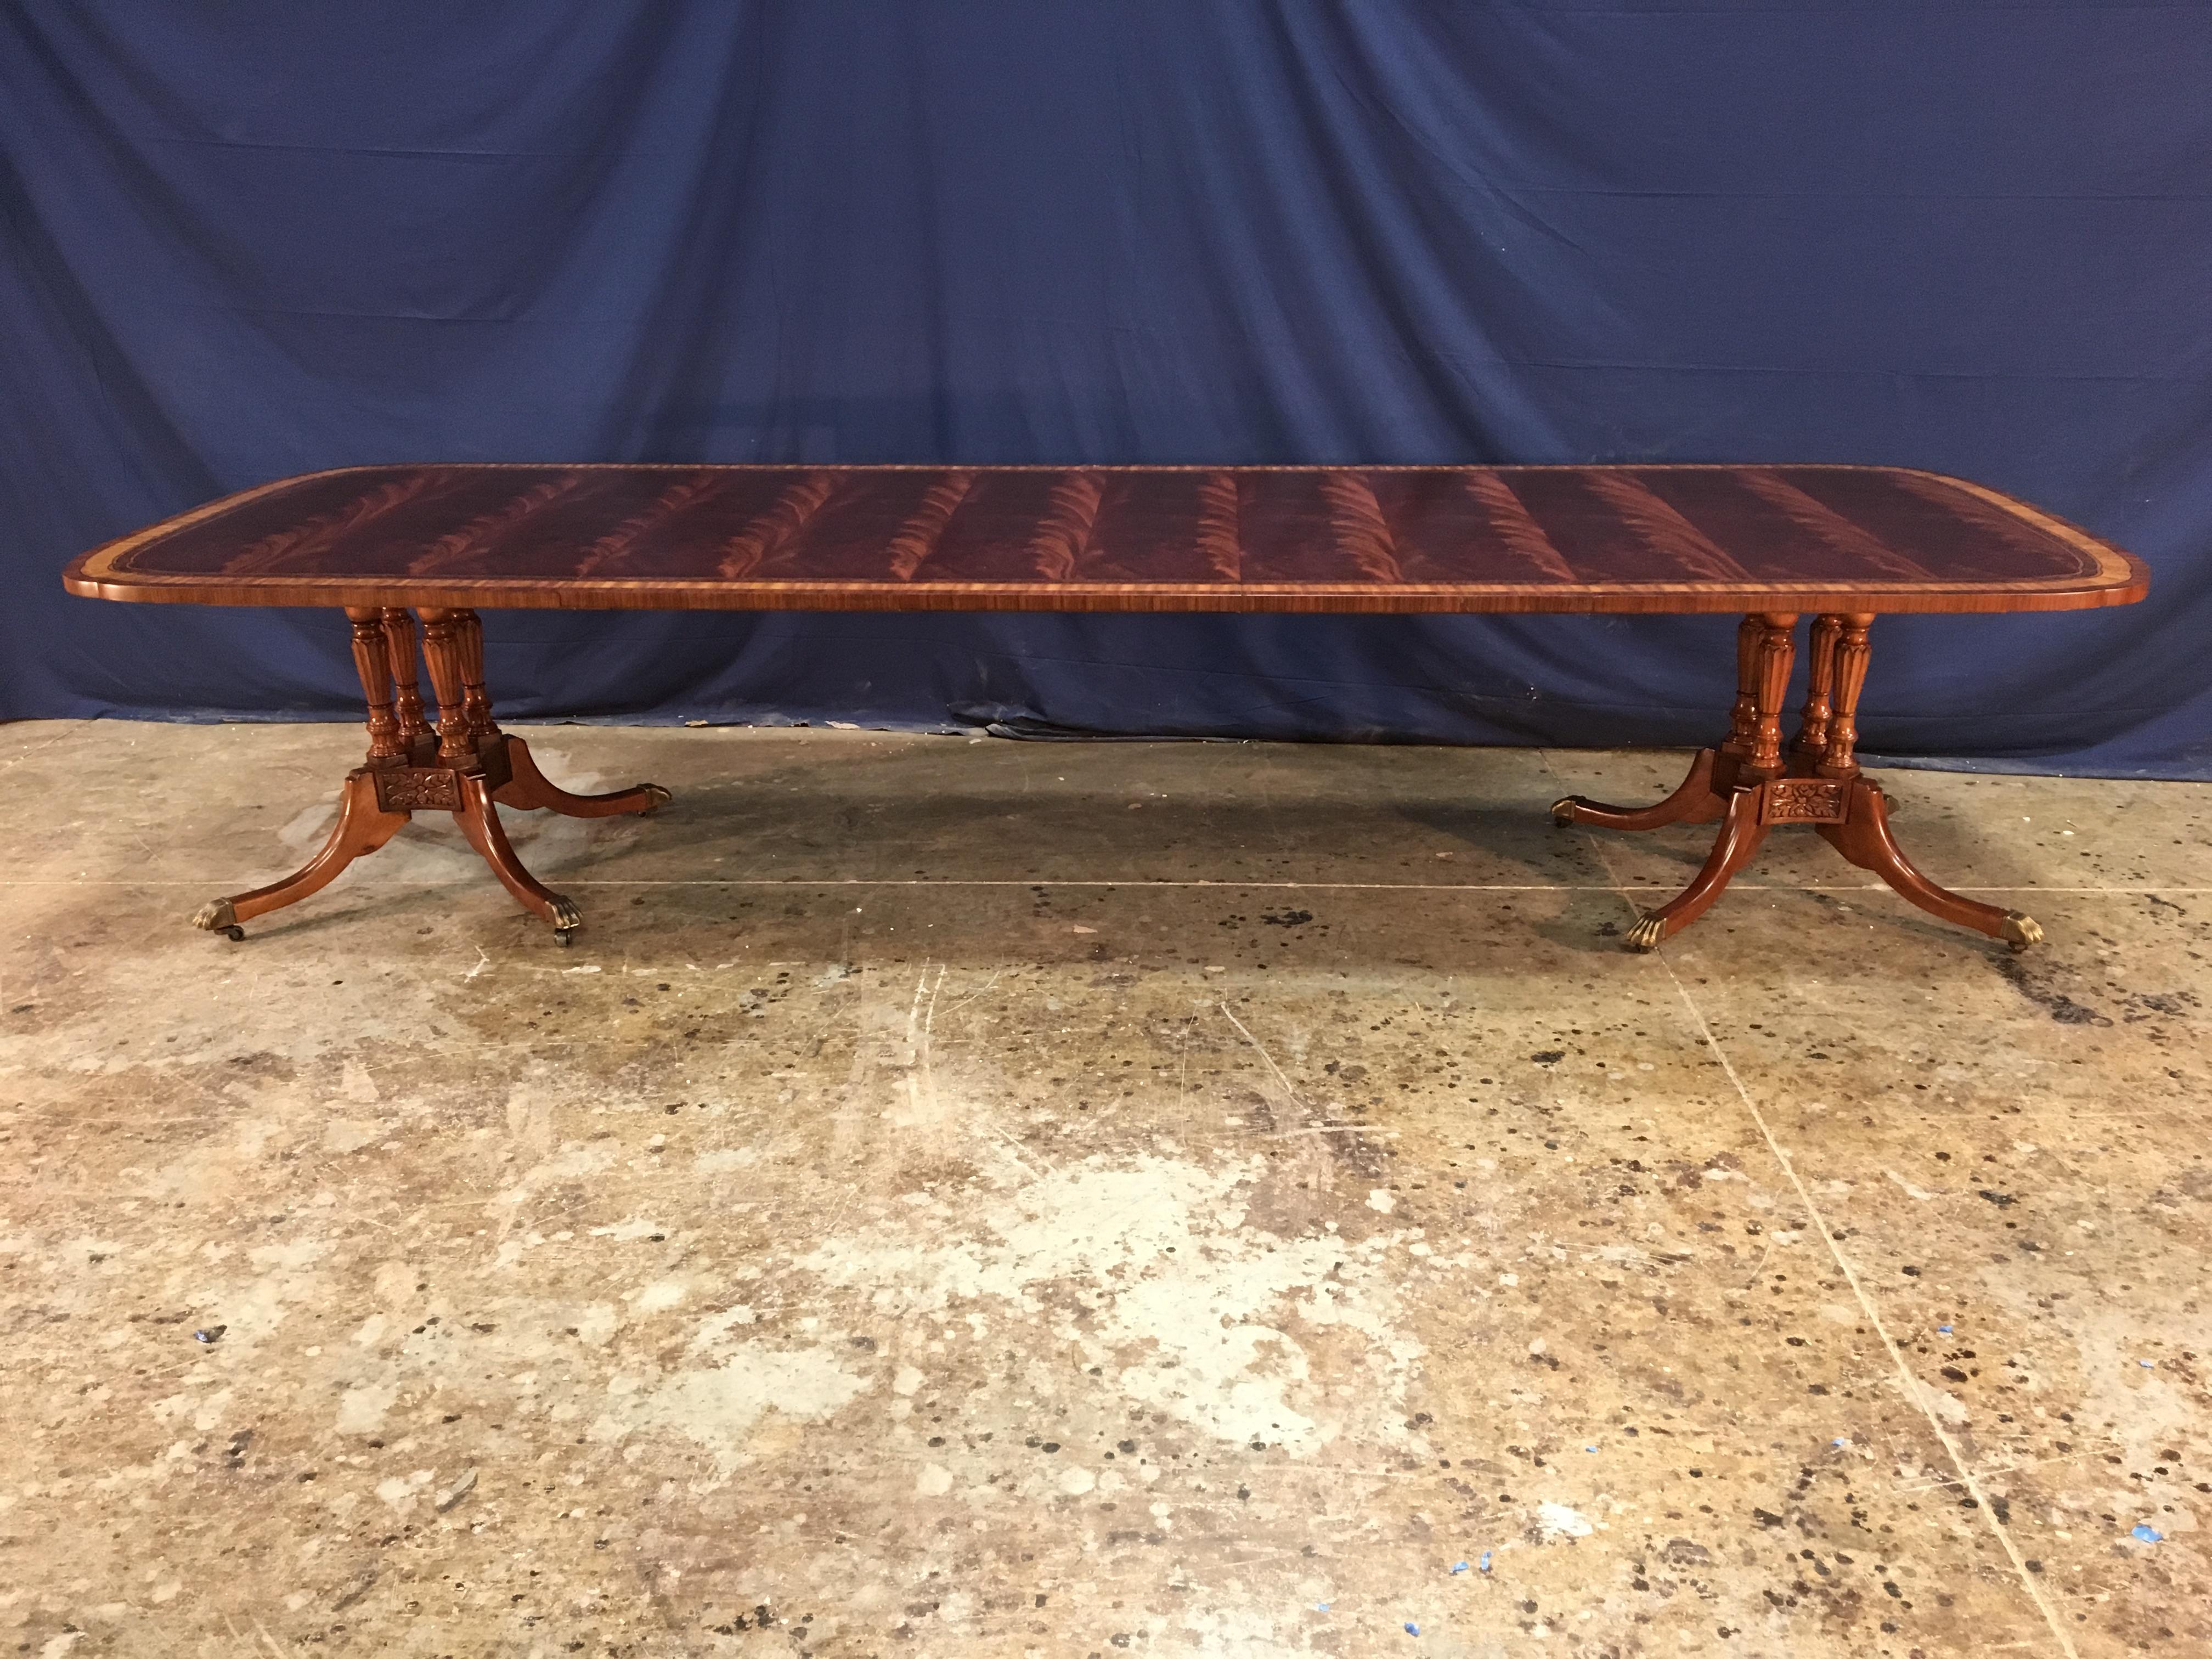 This is a made-to-order traditional mahogany dining table made by Leighton Hall. It’s double scalloped corners gives it a unique delicate shape. It features a field of slip-matched swirly crotch mahogany from West Africa and satinwood, burled walnut